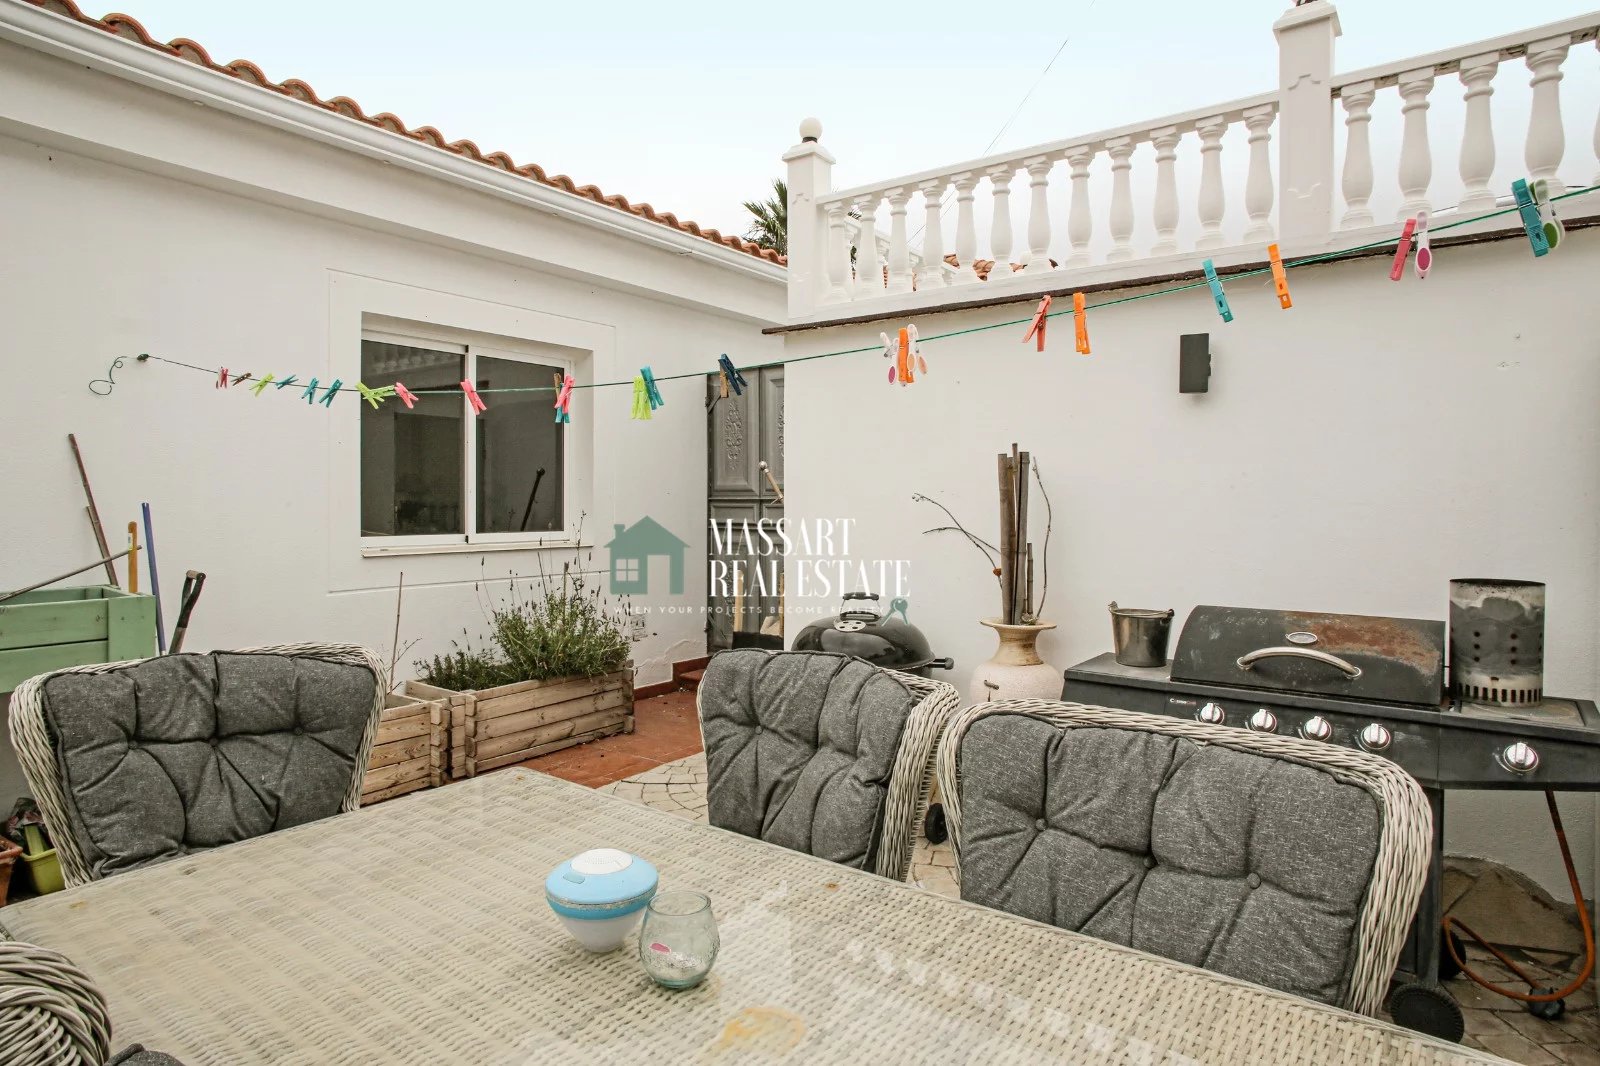 Recently renovated 124 m2 house with an elegant design, located on a 356 m2 plot, in the town of El Frontón.